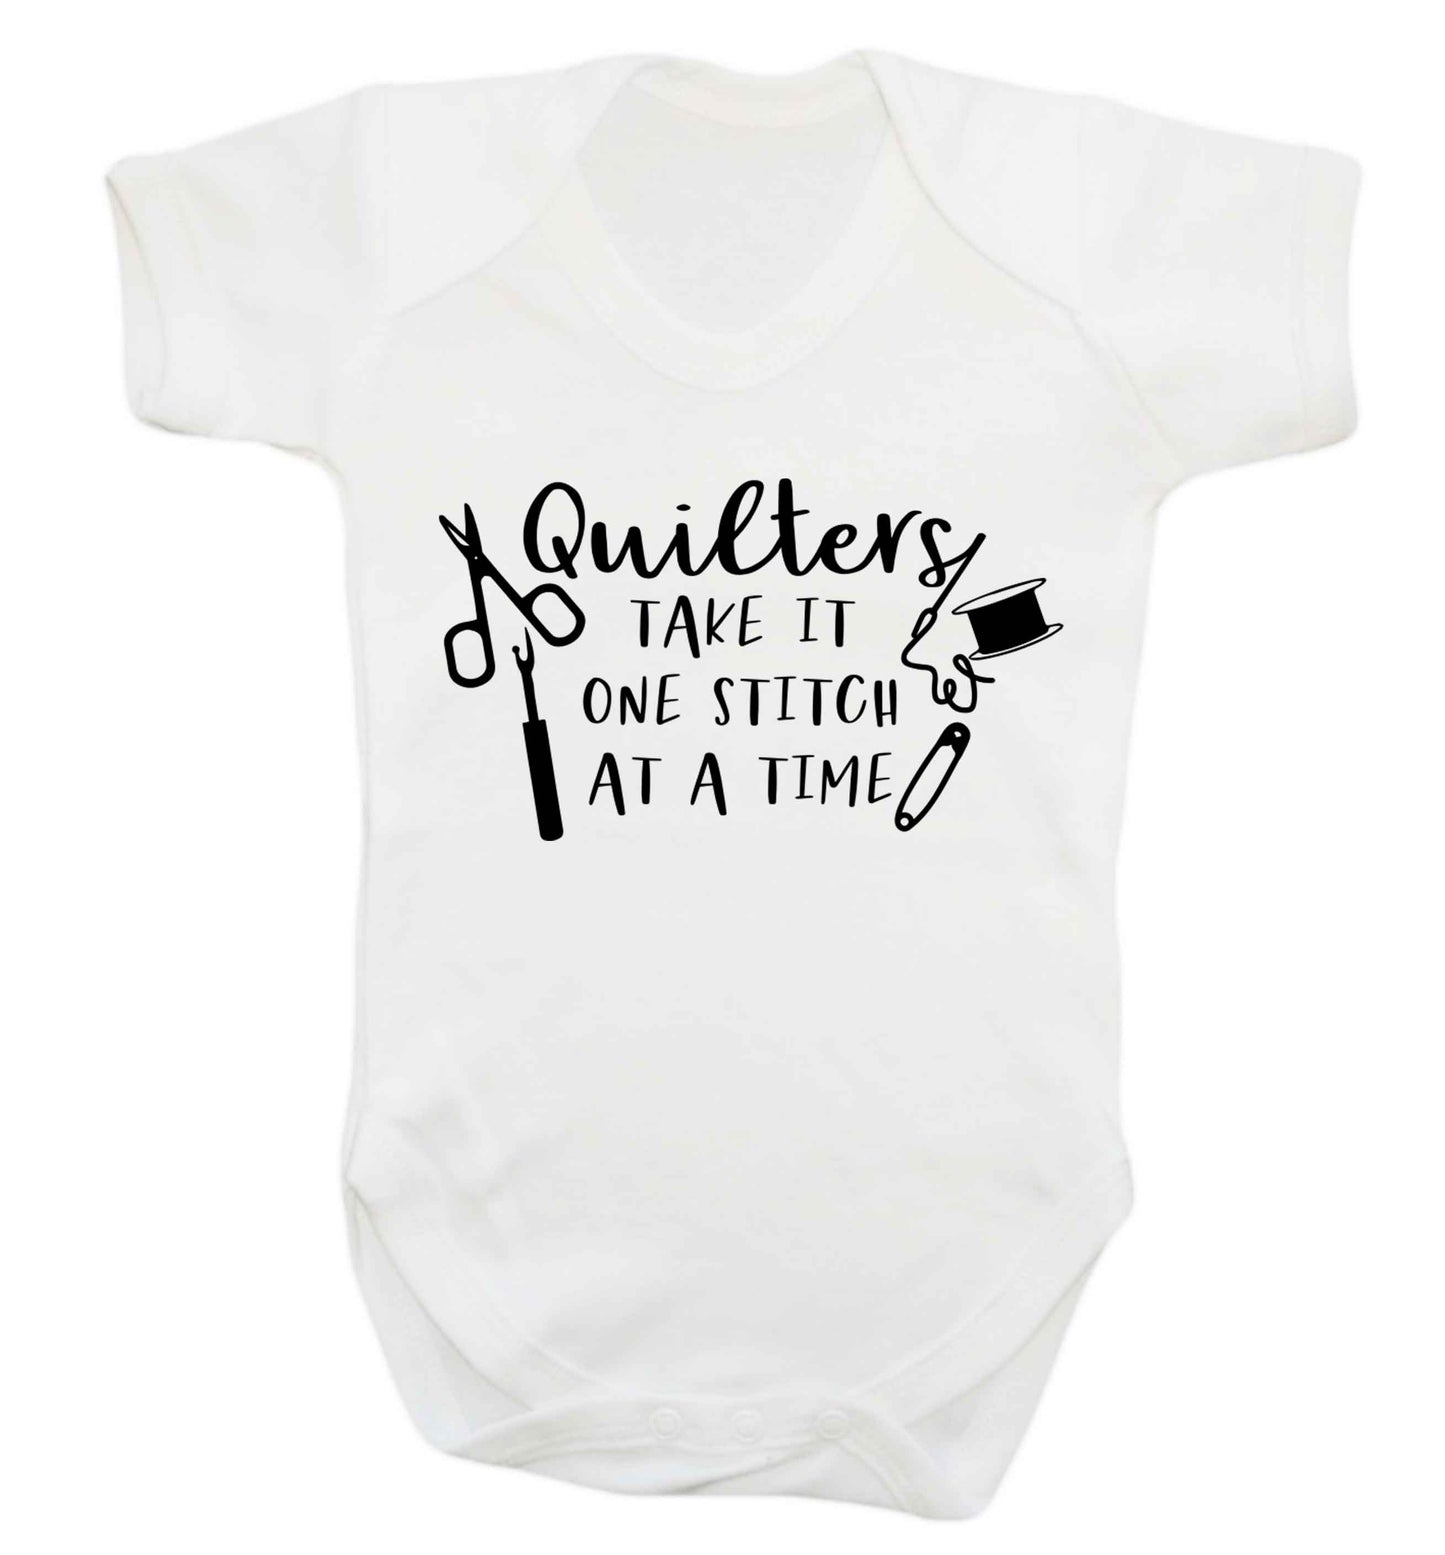 Quilters take it one stitch at a time  Baby Vest white 18-24 months